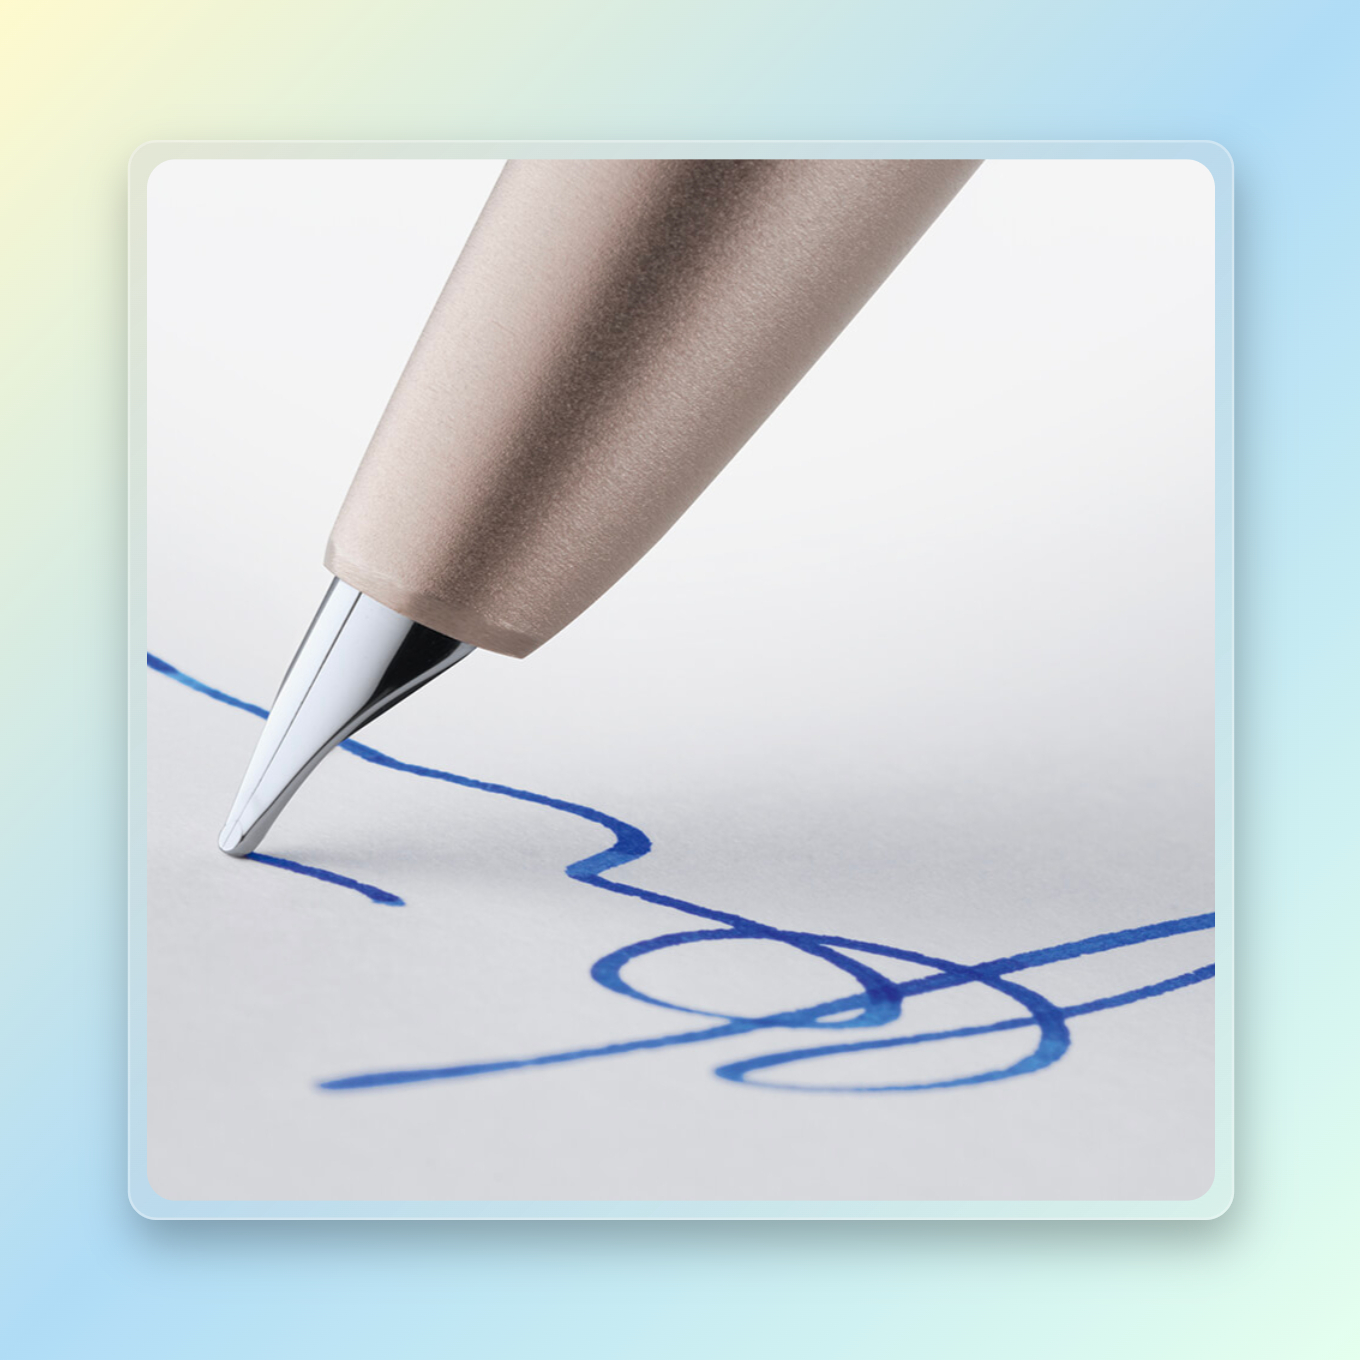 Fountain pen signing a paper